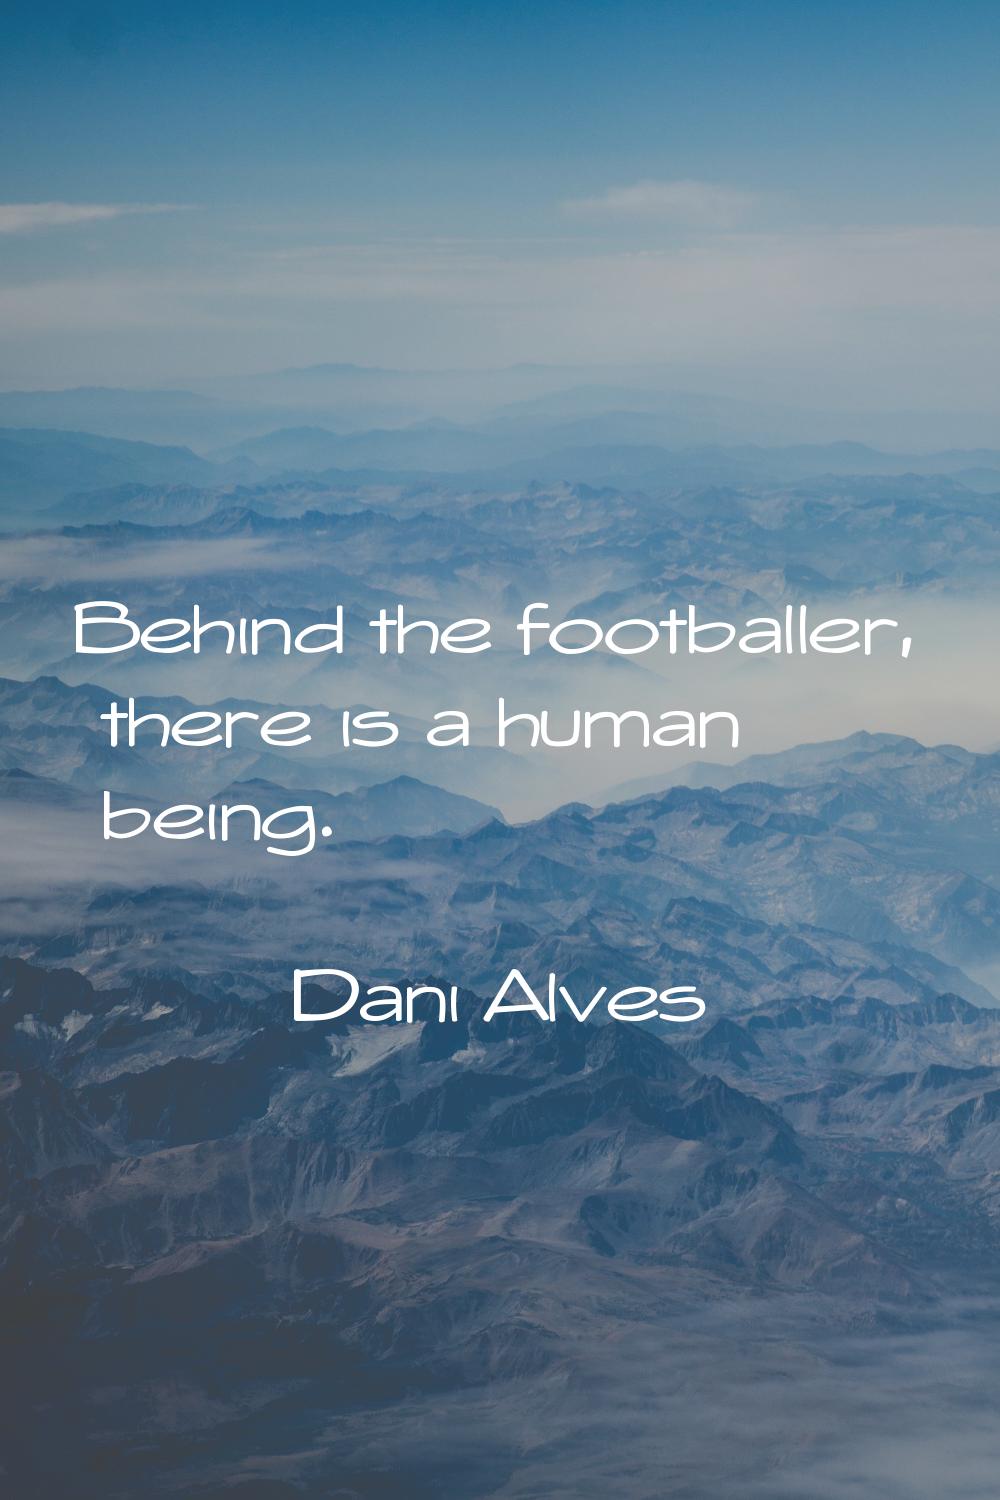 Behind the footballer, there is a human being.